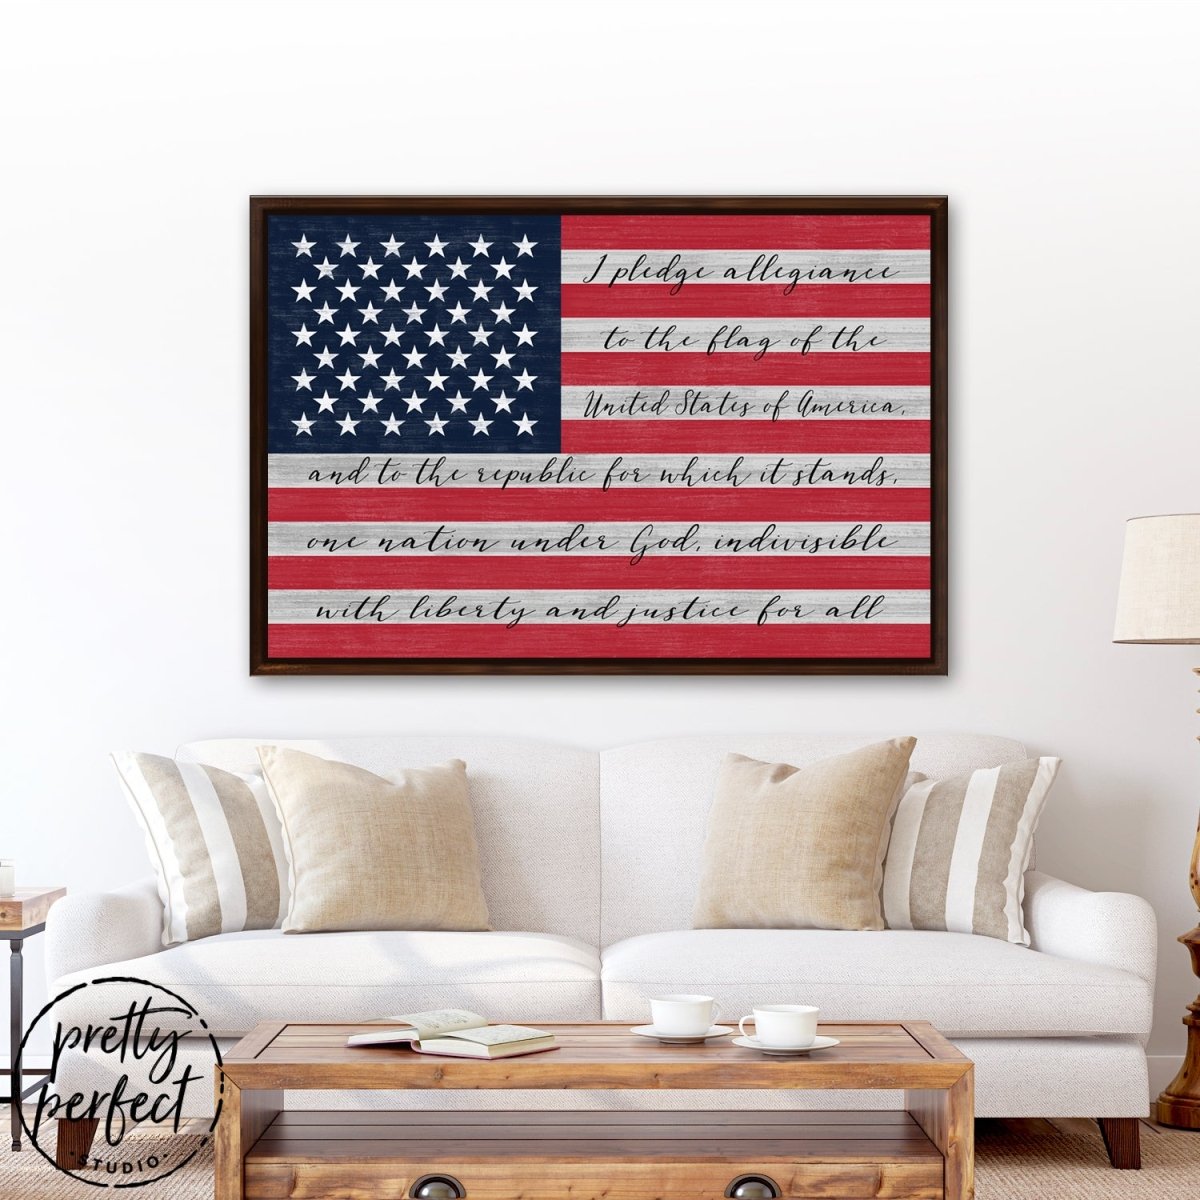 American Flag with Pledge of Allegiance Sign Above Couch - Pretty Perfect Studio